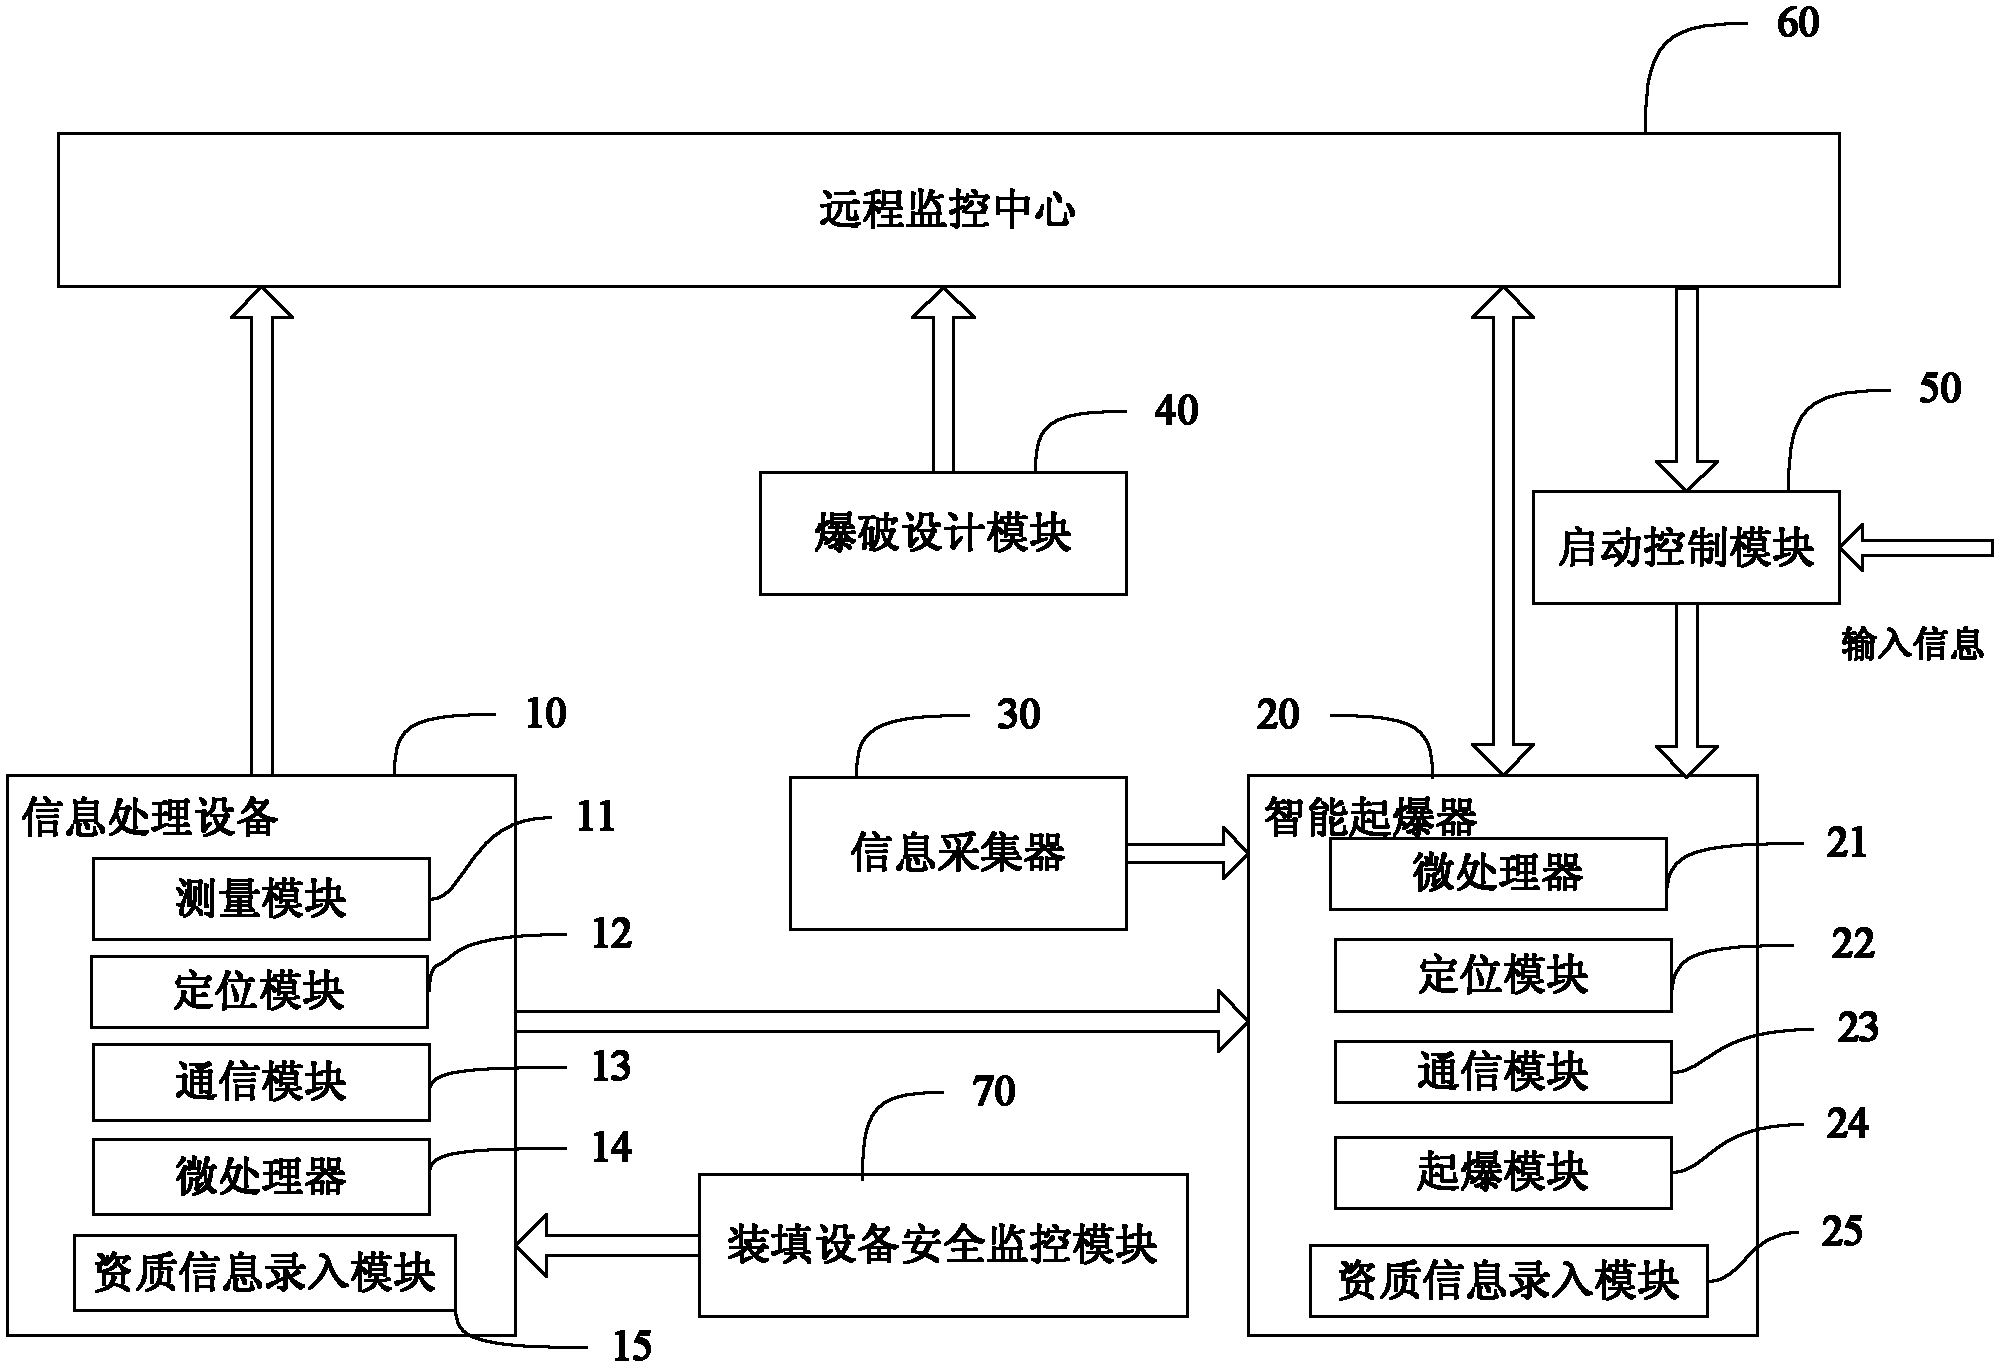 Explosive monitoring system and method